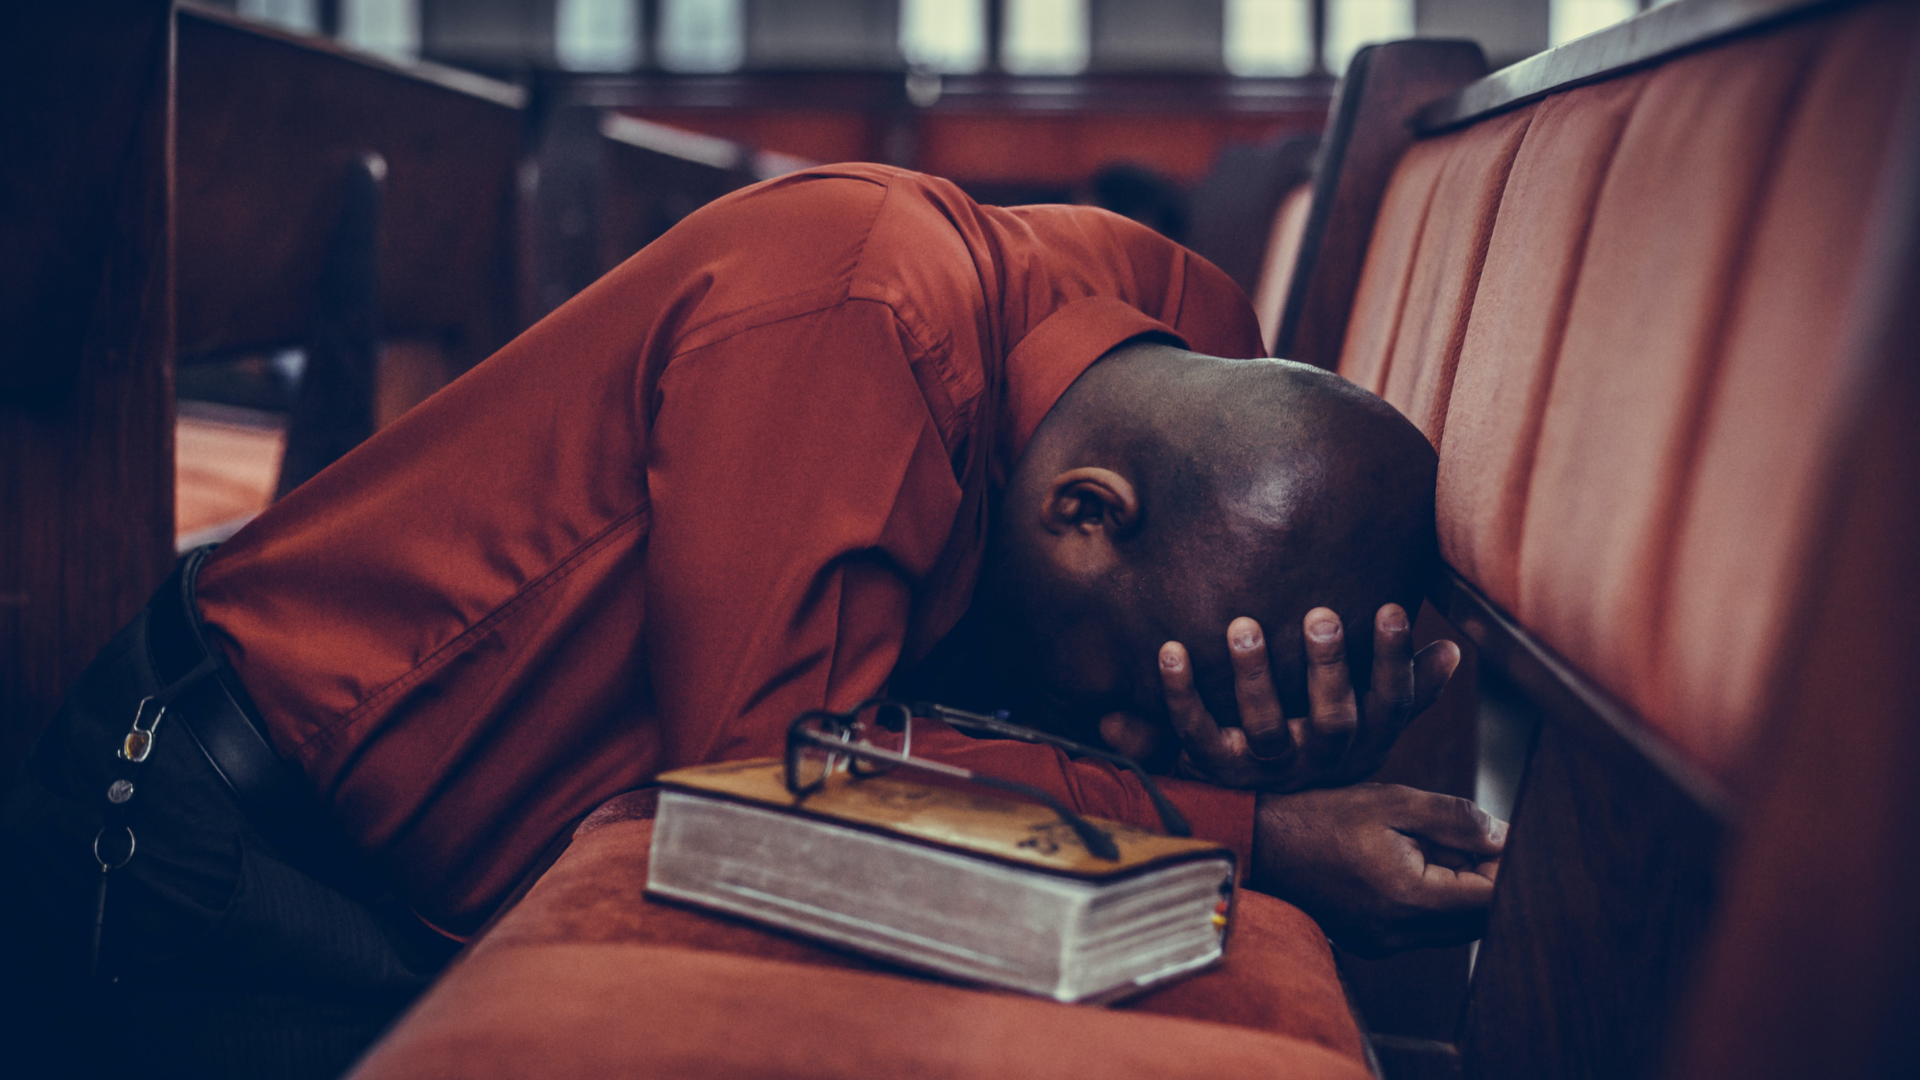 Black man kneeling down in a red church pew holding his head with a Bible and pair of glasses sitting beside him